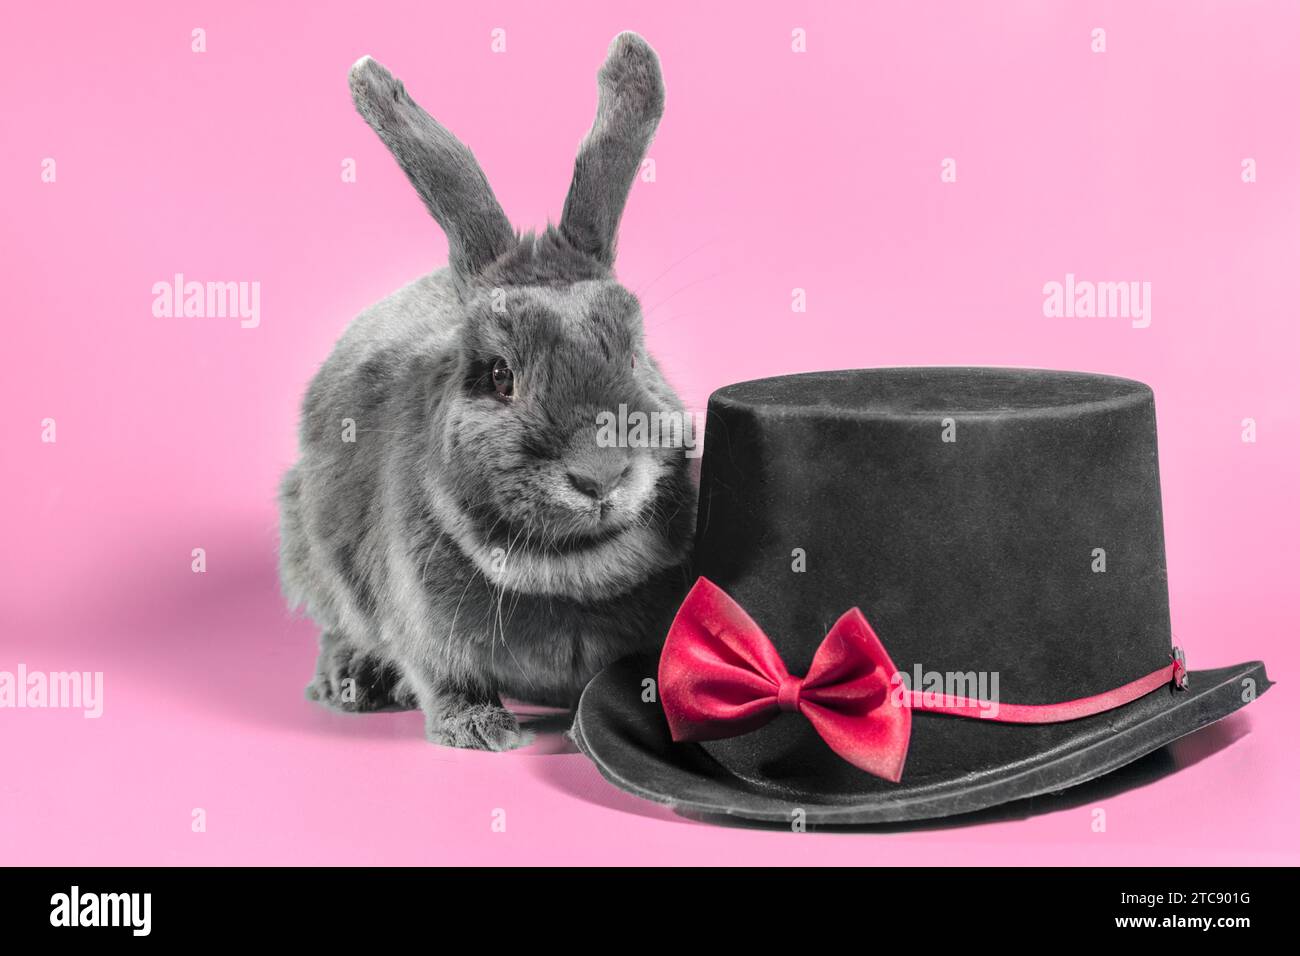 Gray lop-eared dwarf rabbit next to a black cylinder hat on a pink background Stock Photo